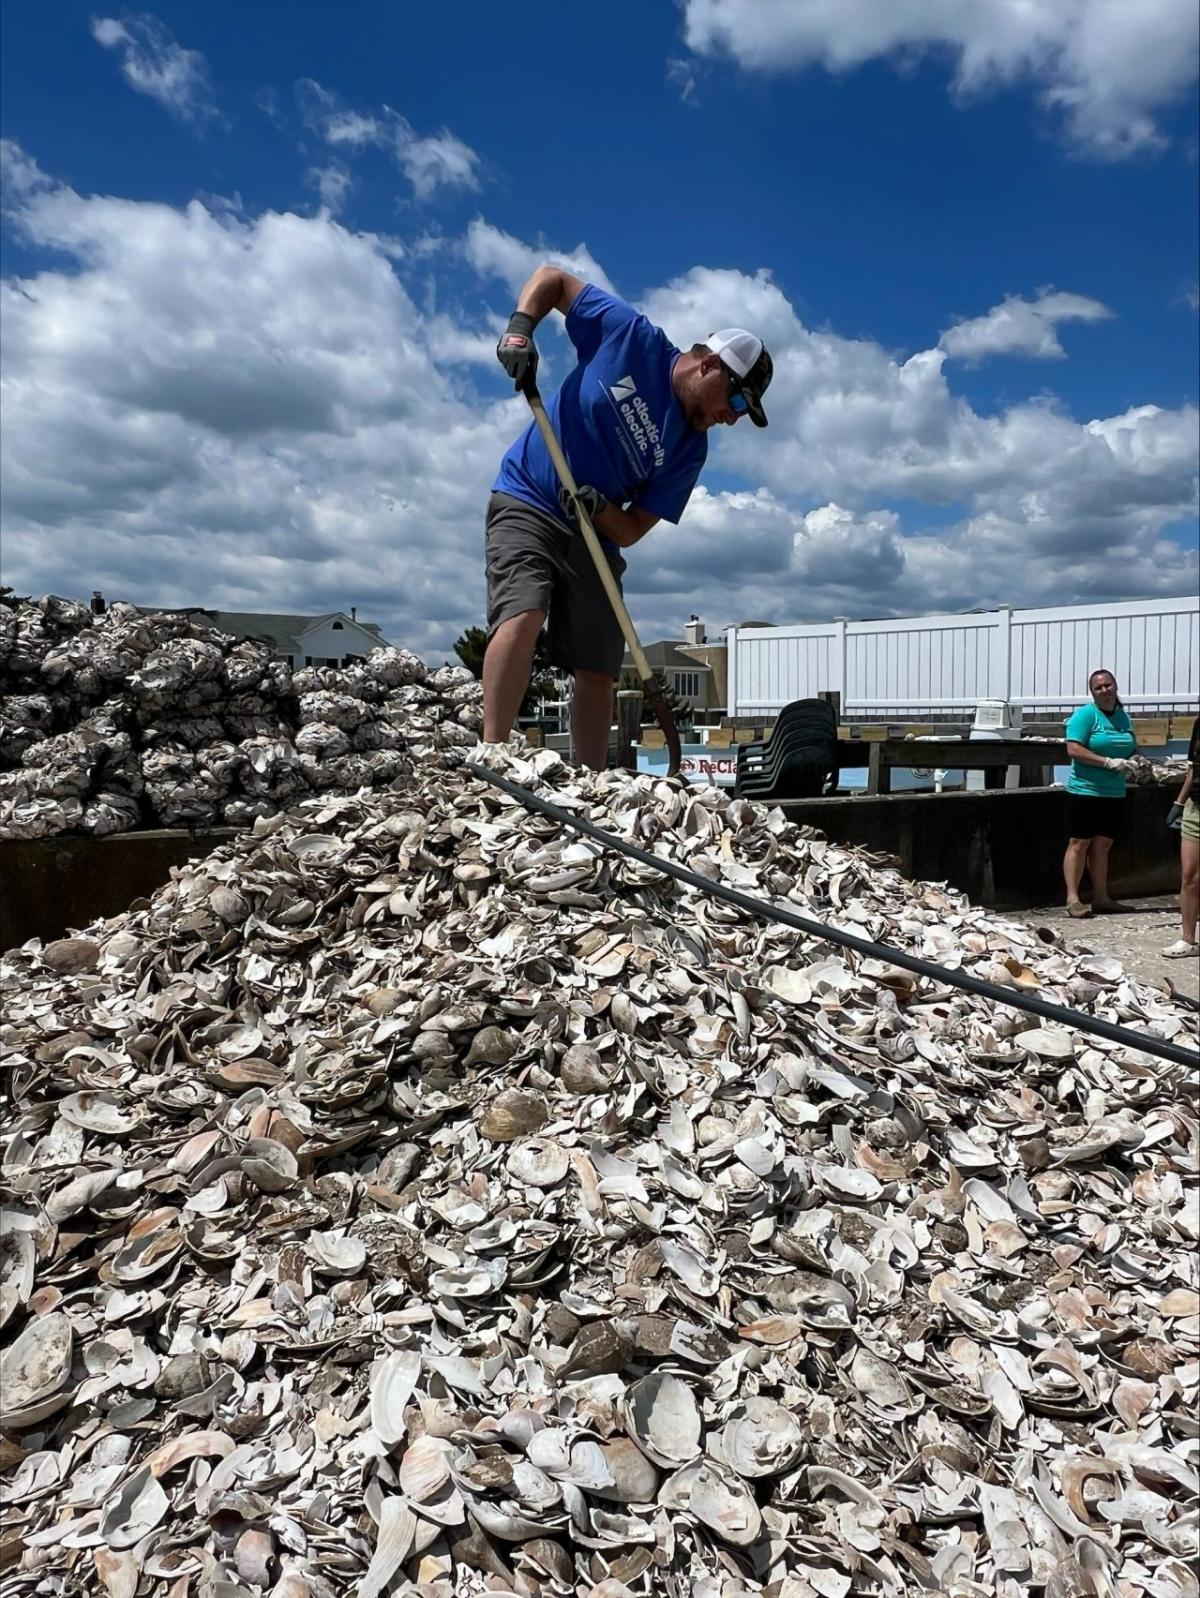 A person stood on top of a pile of shells